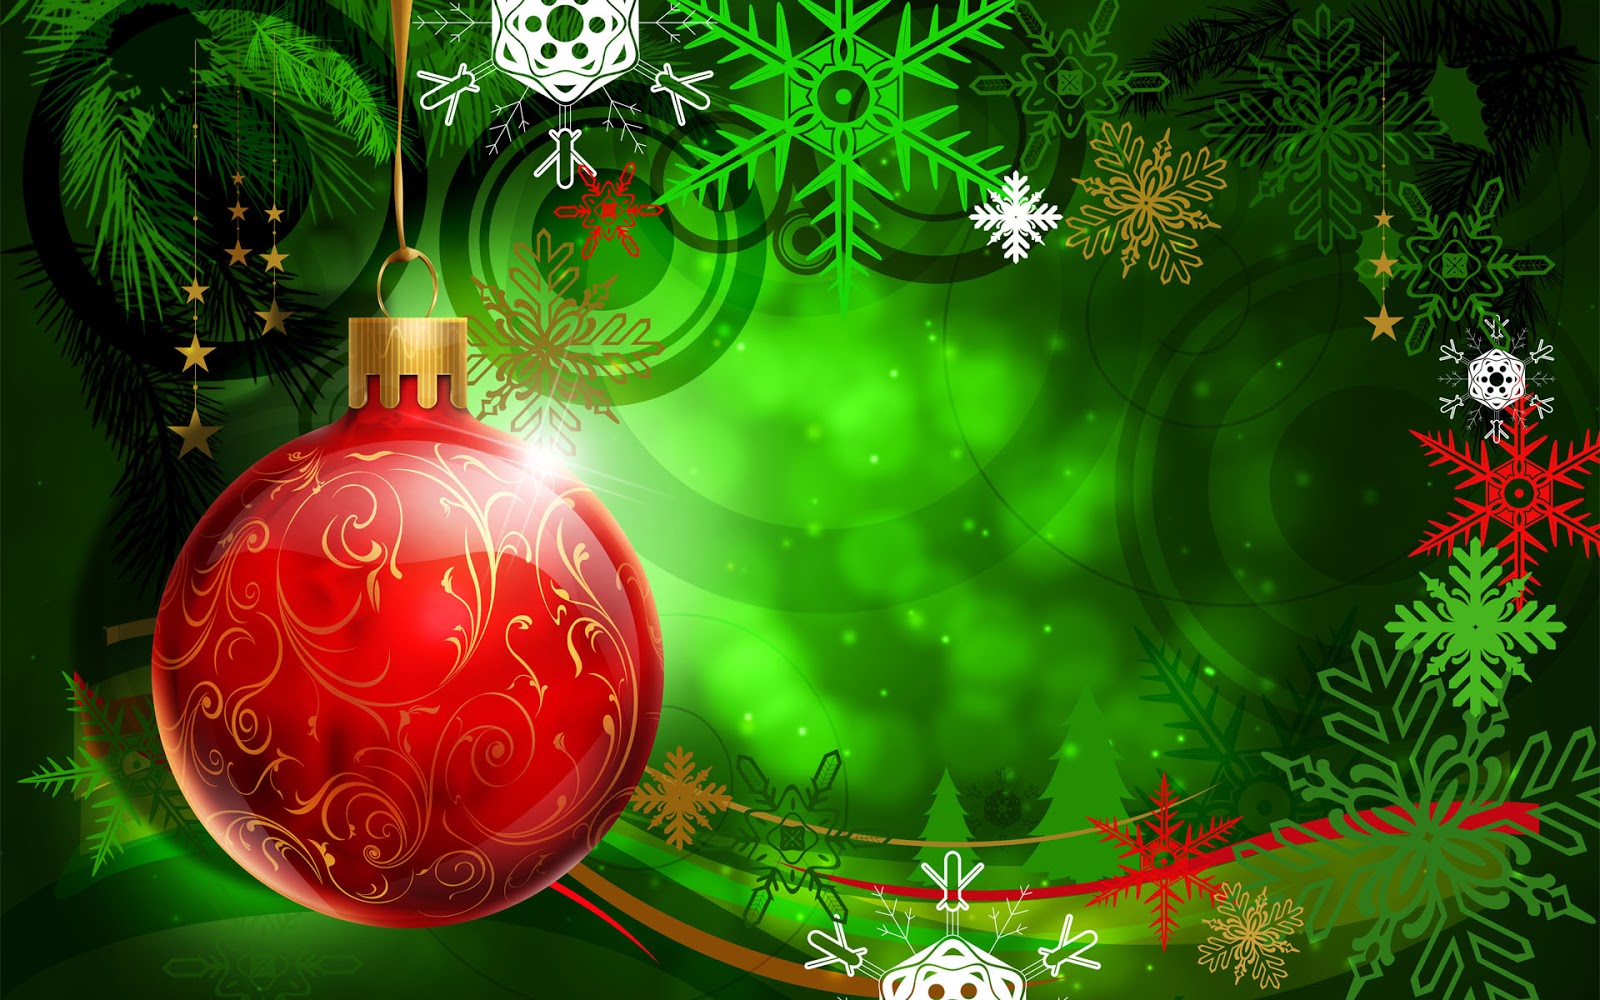  heart touching christmas screensavers christmas images or wallpapers